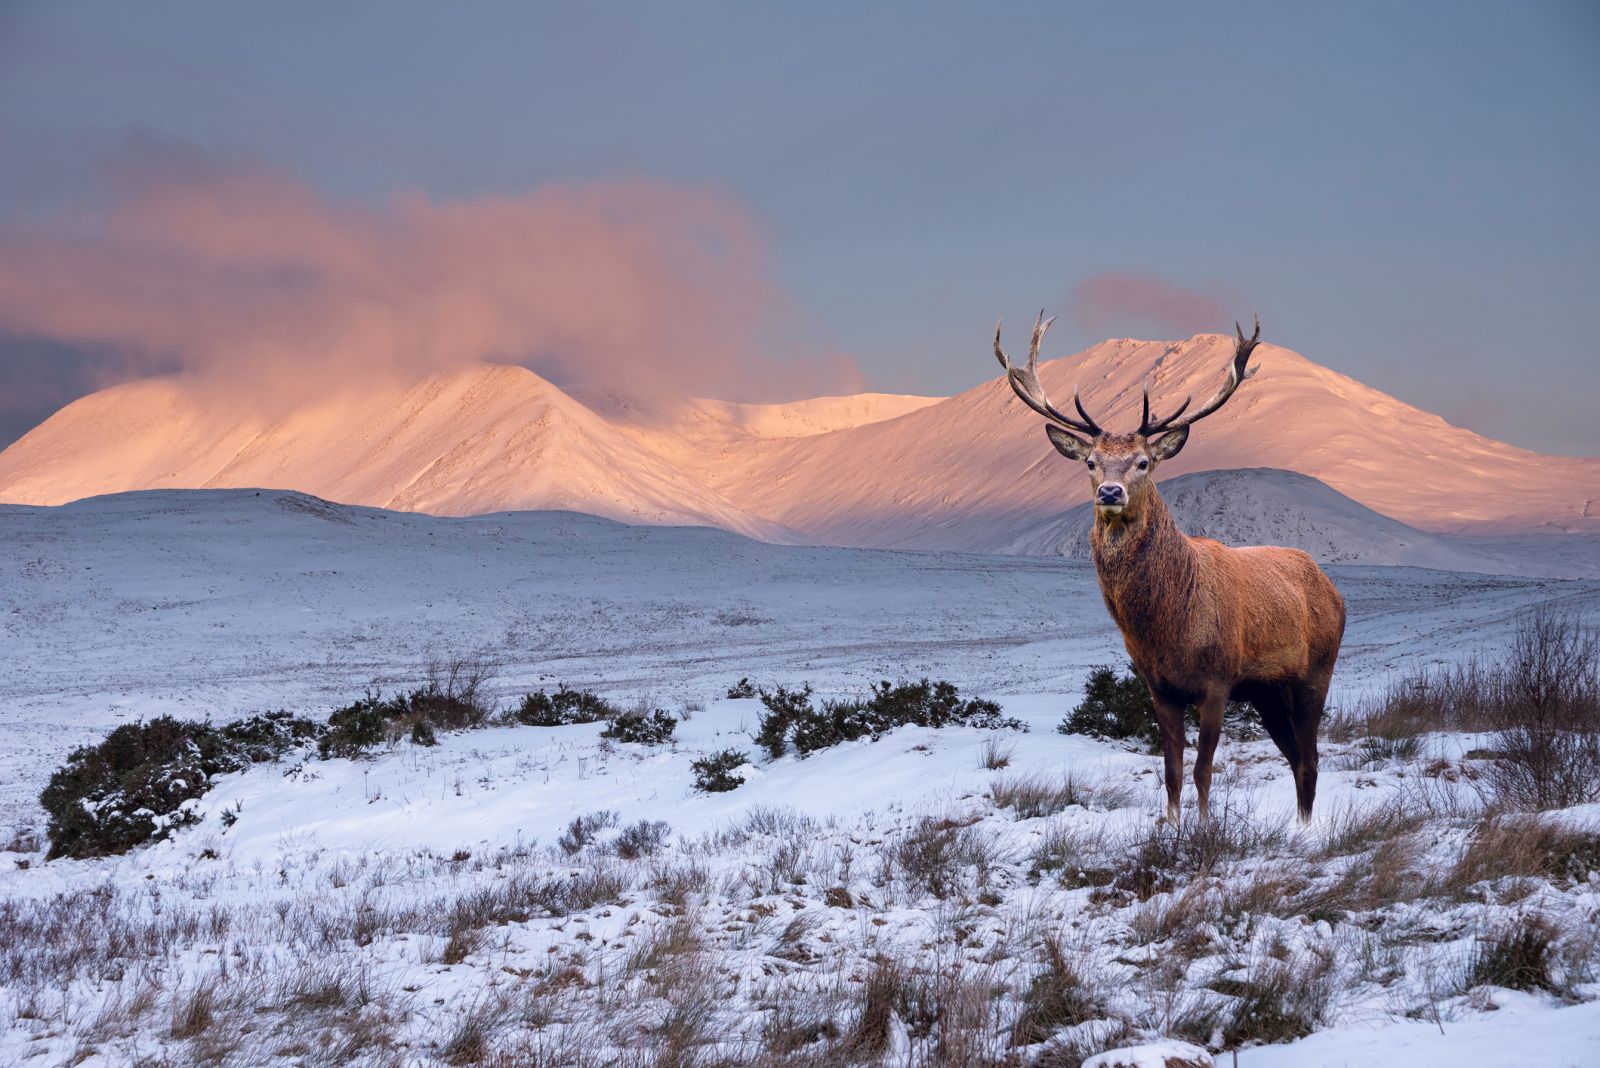 Stag in front of a snowy Scottish mountain banner image